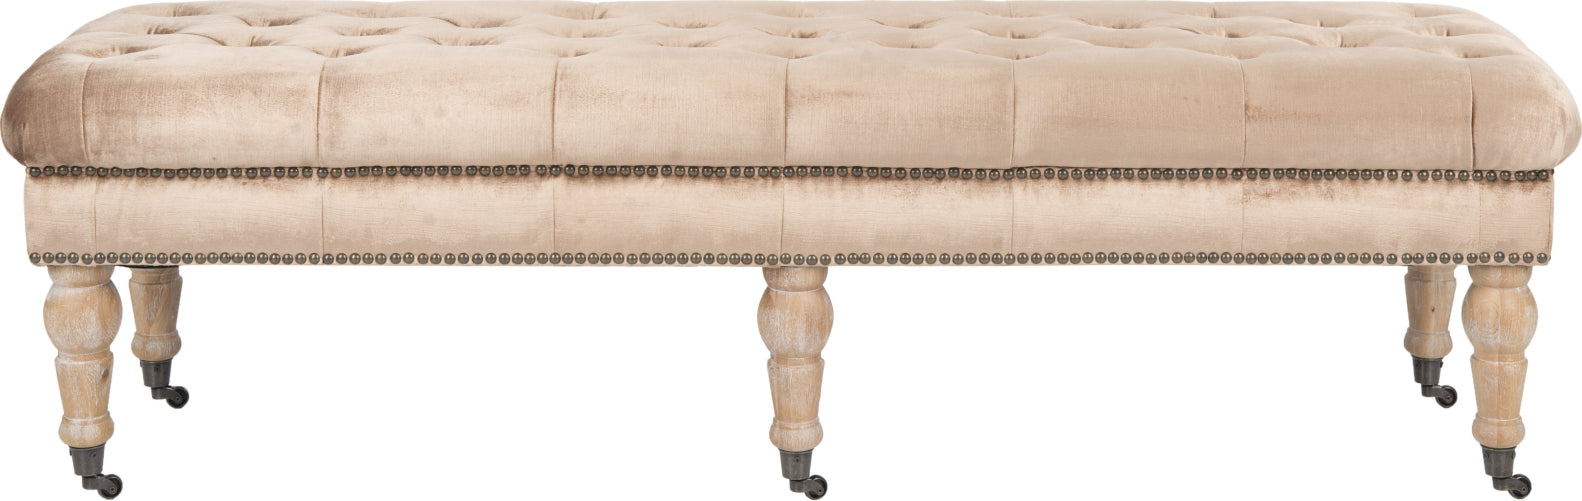 Safavieh Barney Tufted Bench-Brass Nail Heads Mink Brown and Pickled Oak Furniture main image